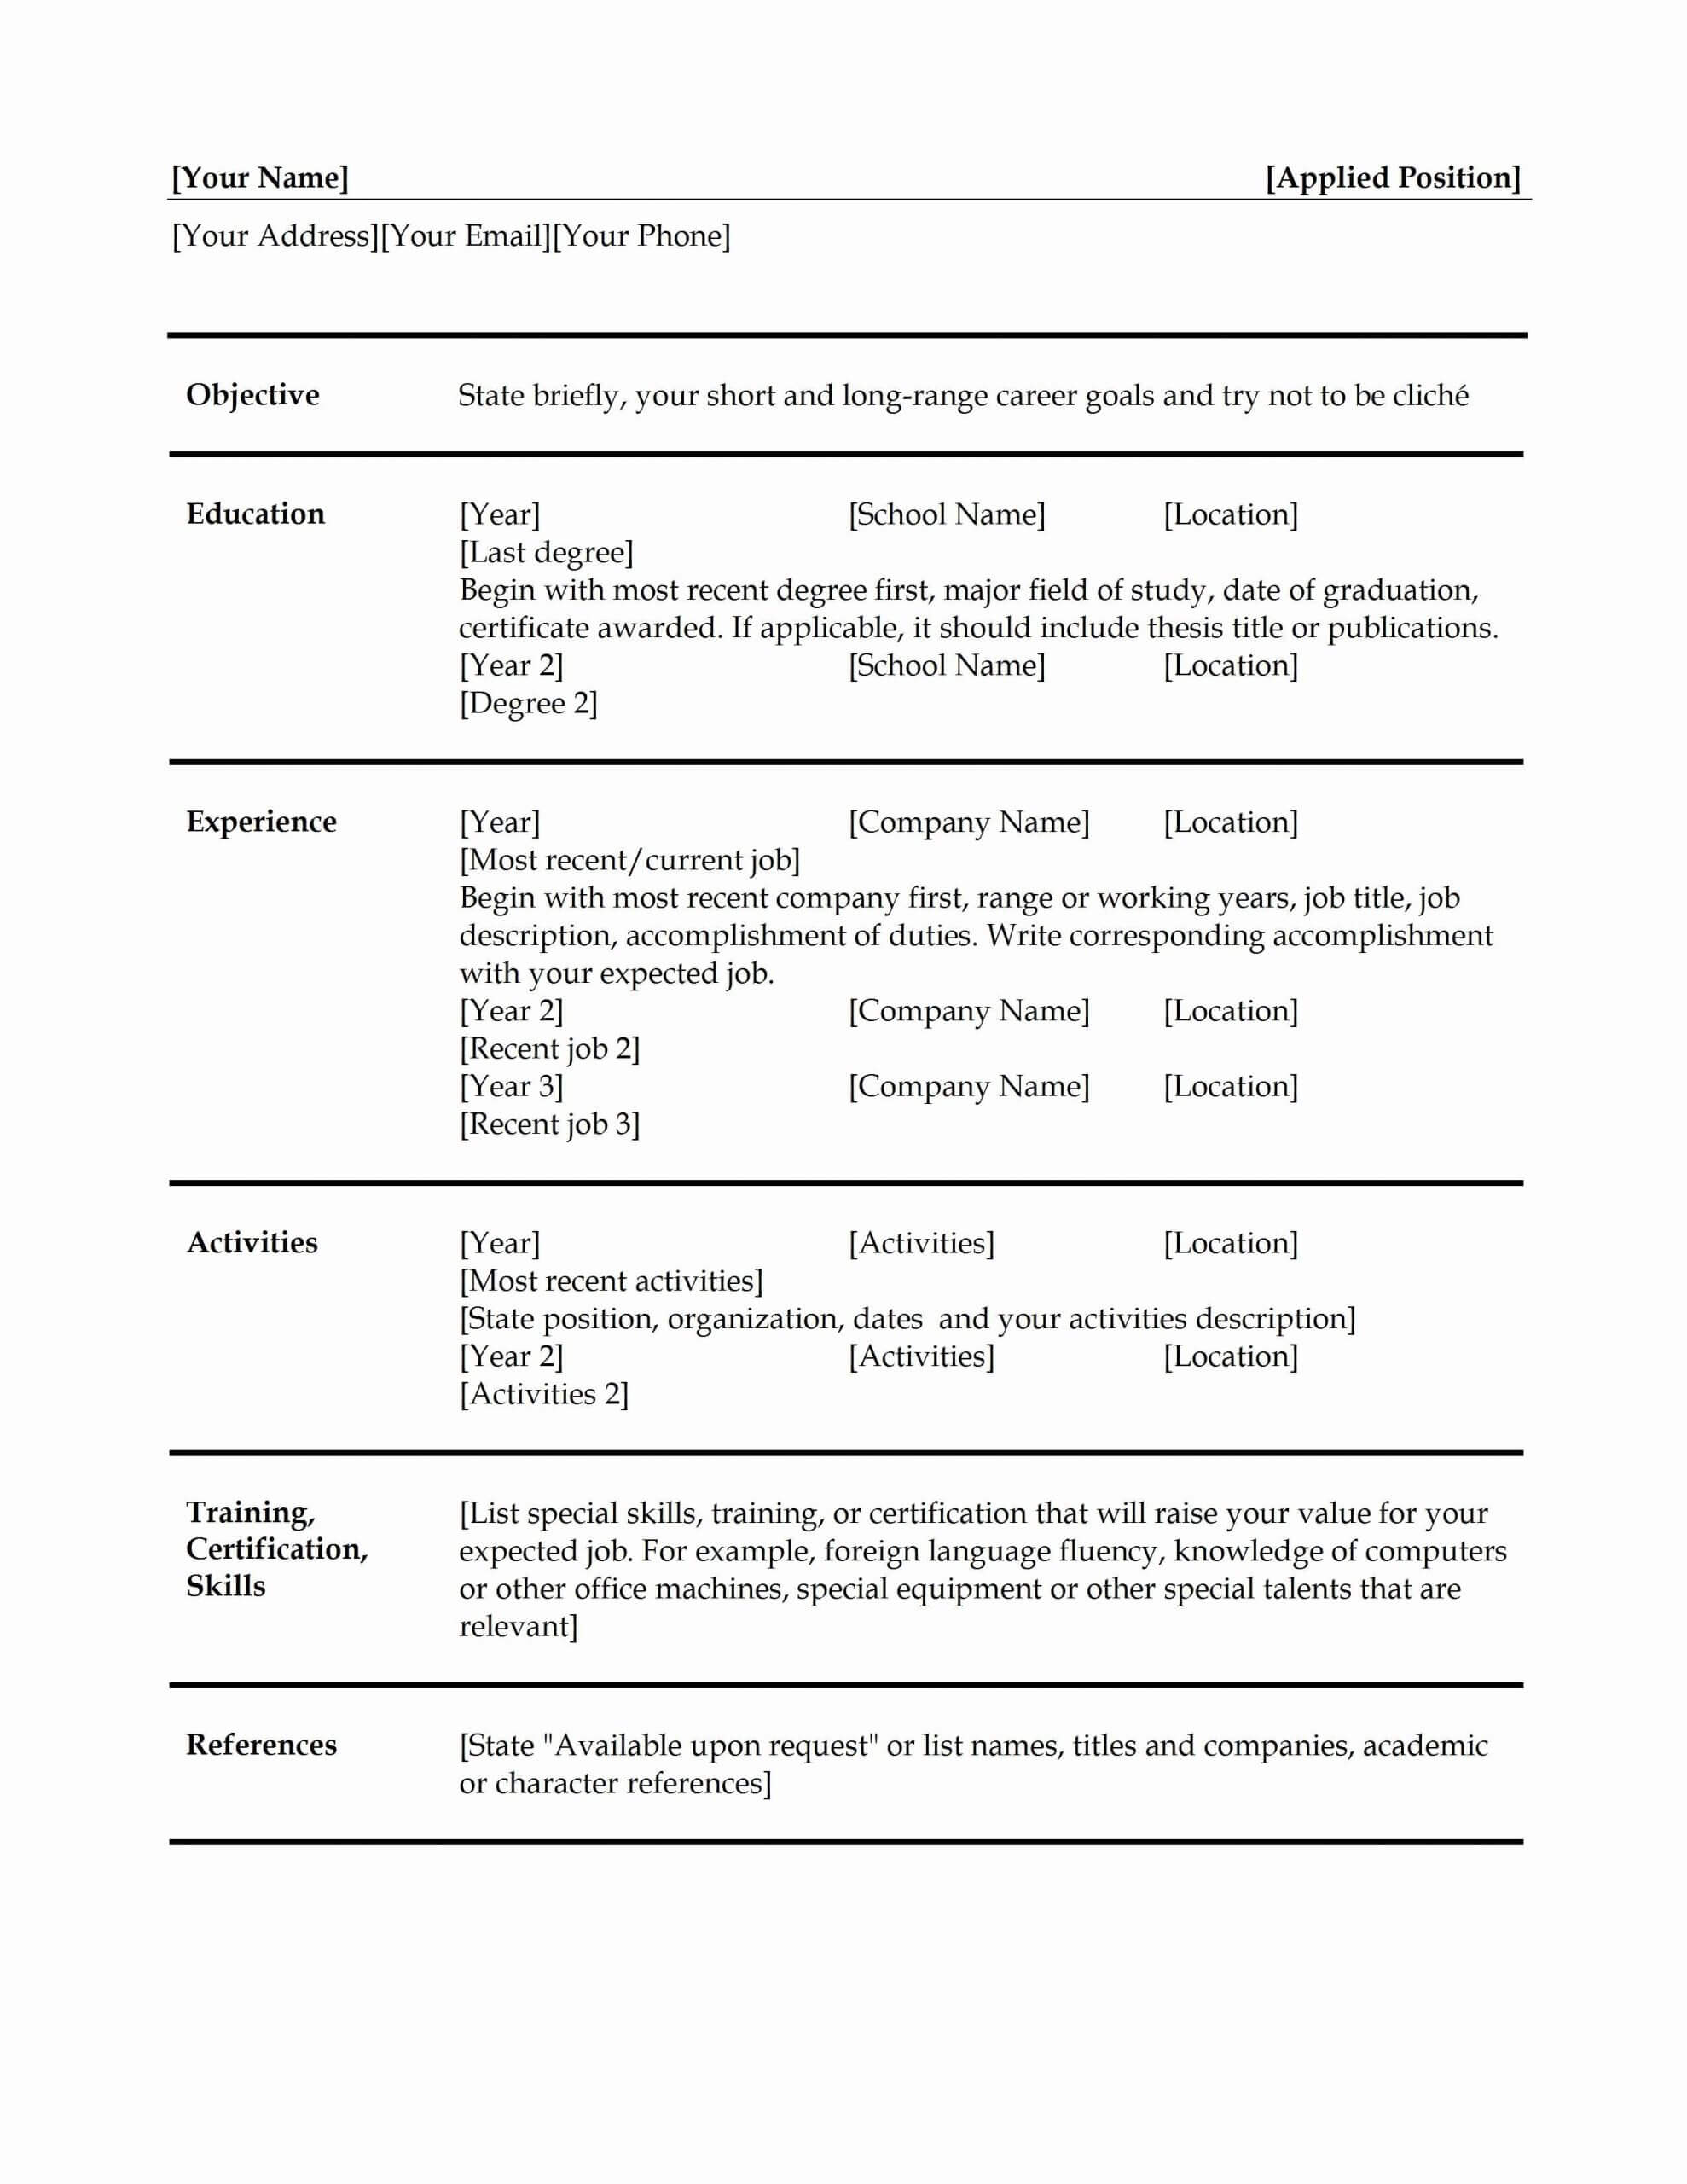 Report Examples Conflict Minerals Reporting Template Example For Eicc Conflict Minerals Reporting Template